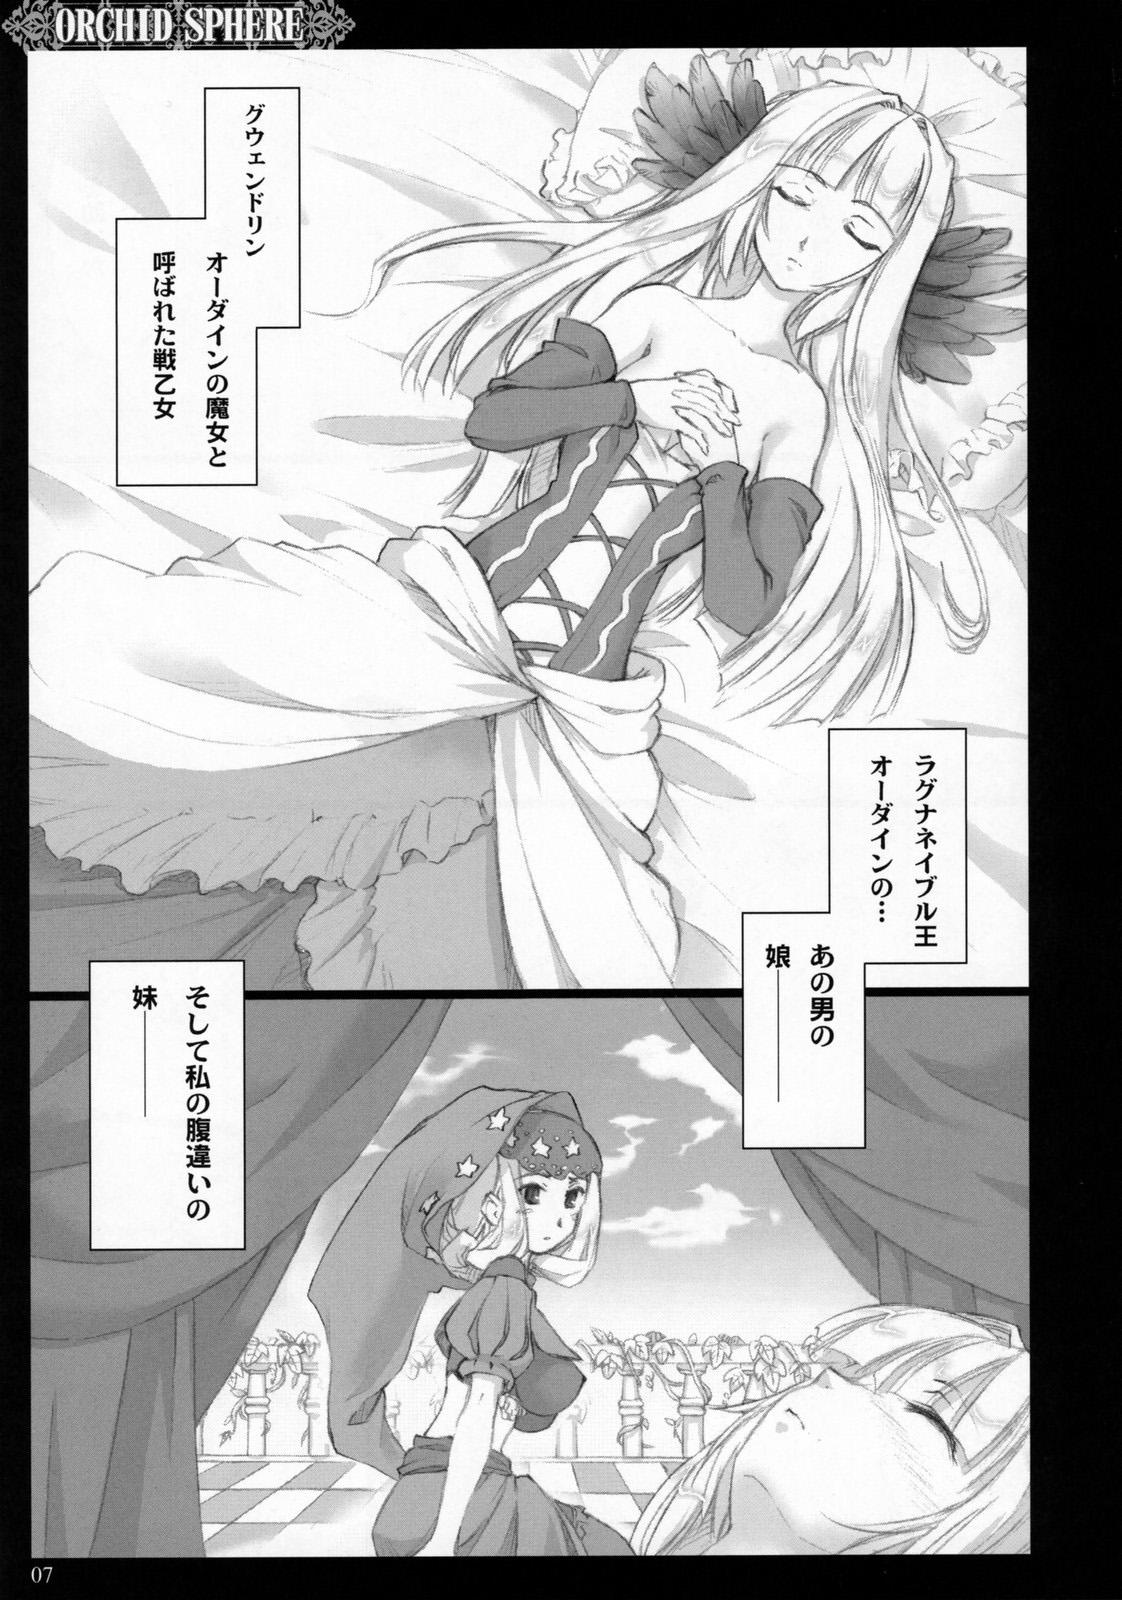 Tetas Grandes Orchid Sphere - Odin sphere Anime - Page 6